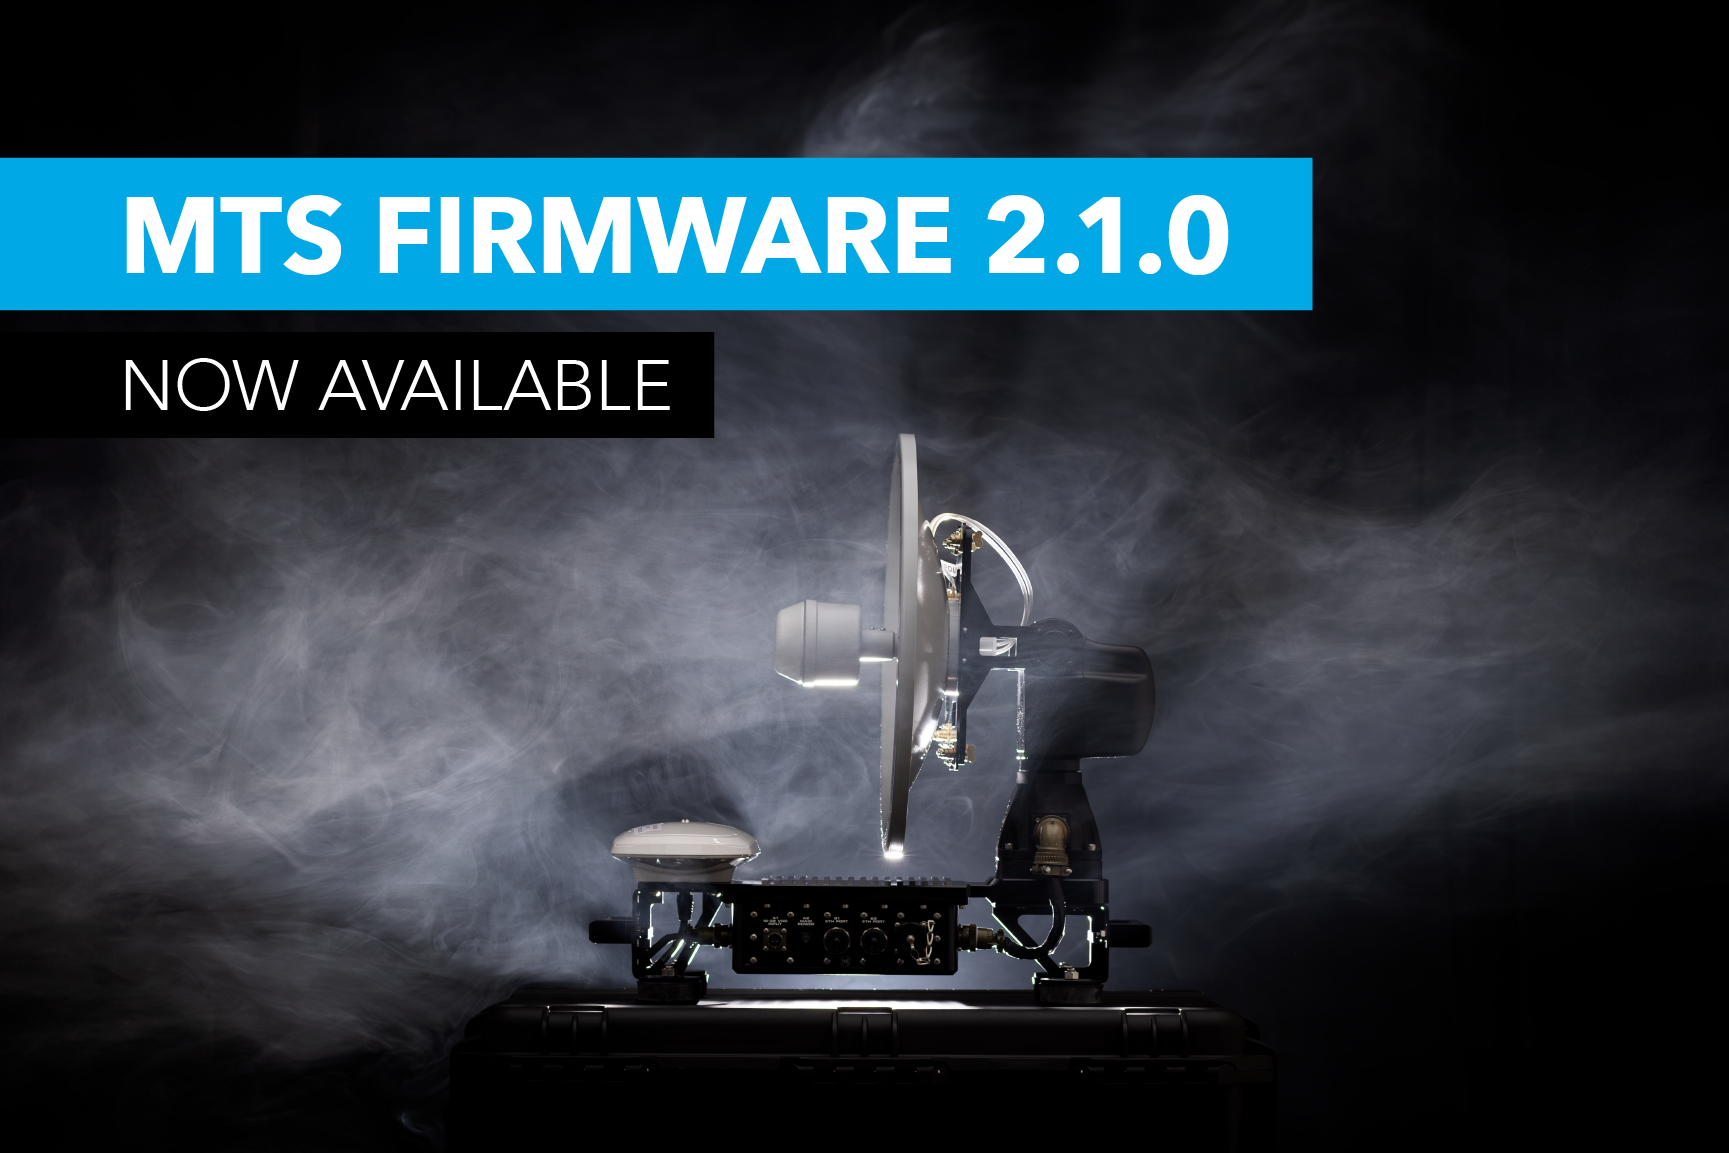 MTS Firmware 2.1.0 Now Available